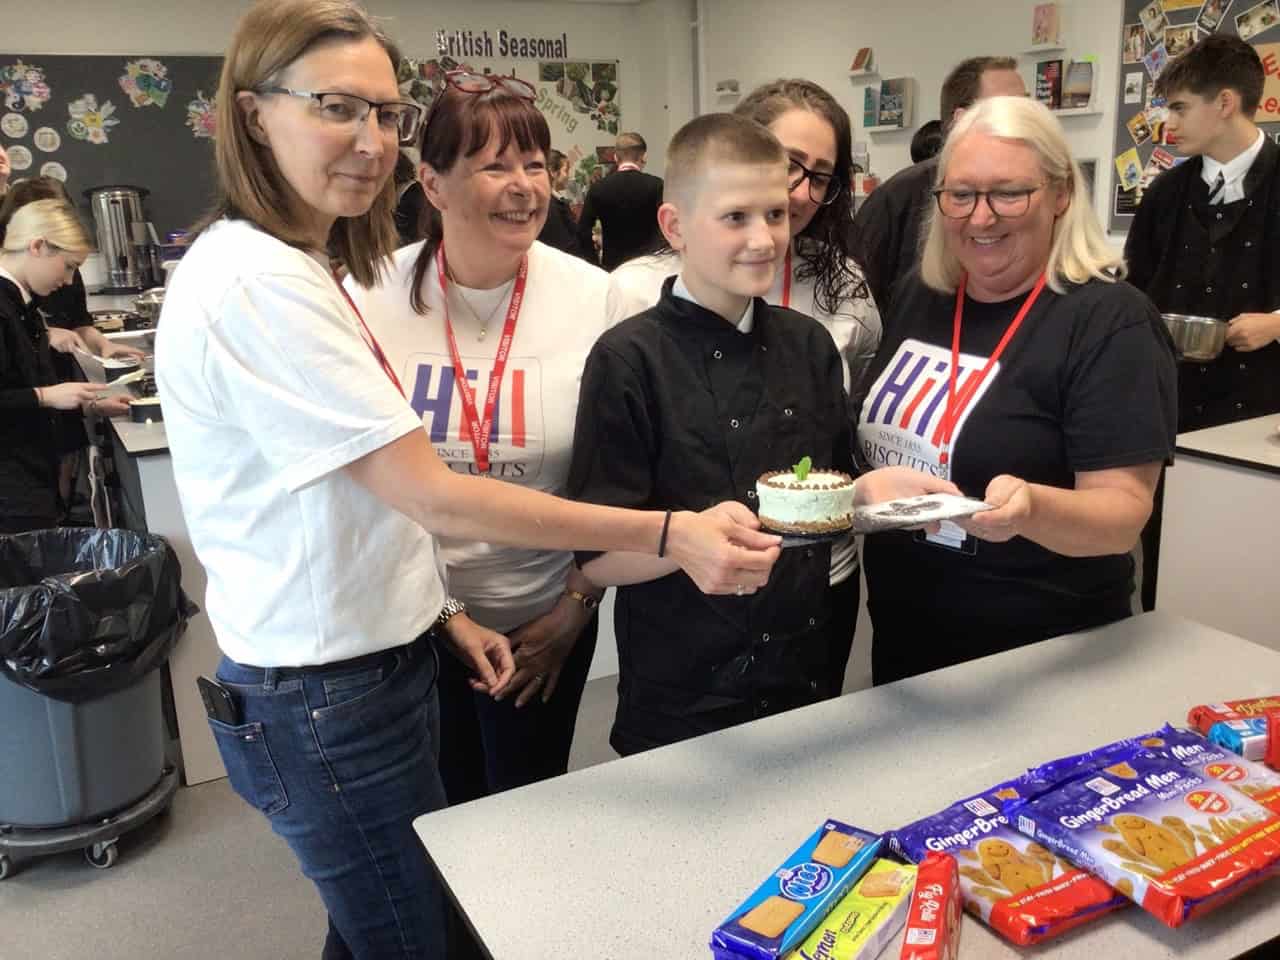 The runner up student stands with Hill Biscuits staff and holds his cheesecake at Laurus Ryecroft on National Biscuit Day.